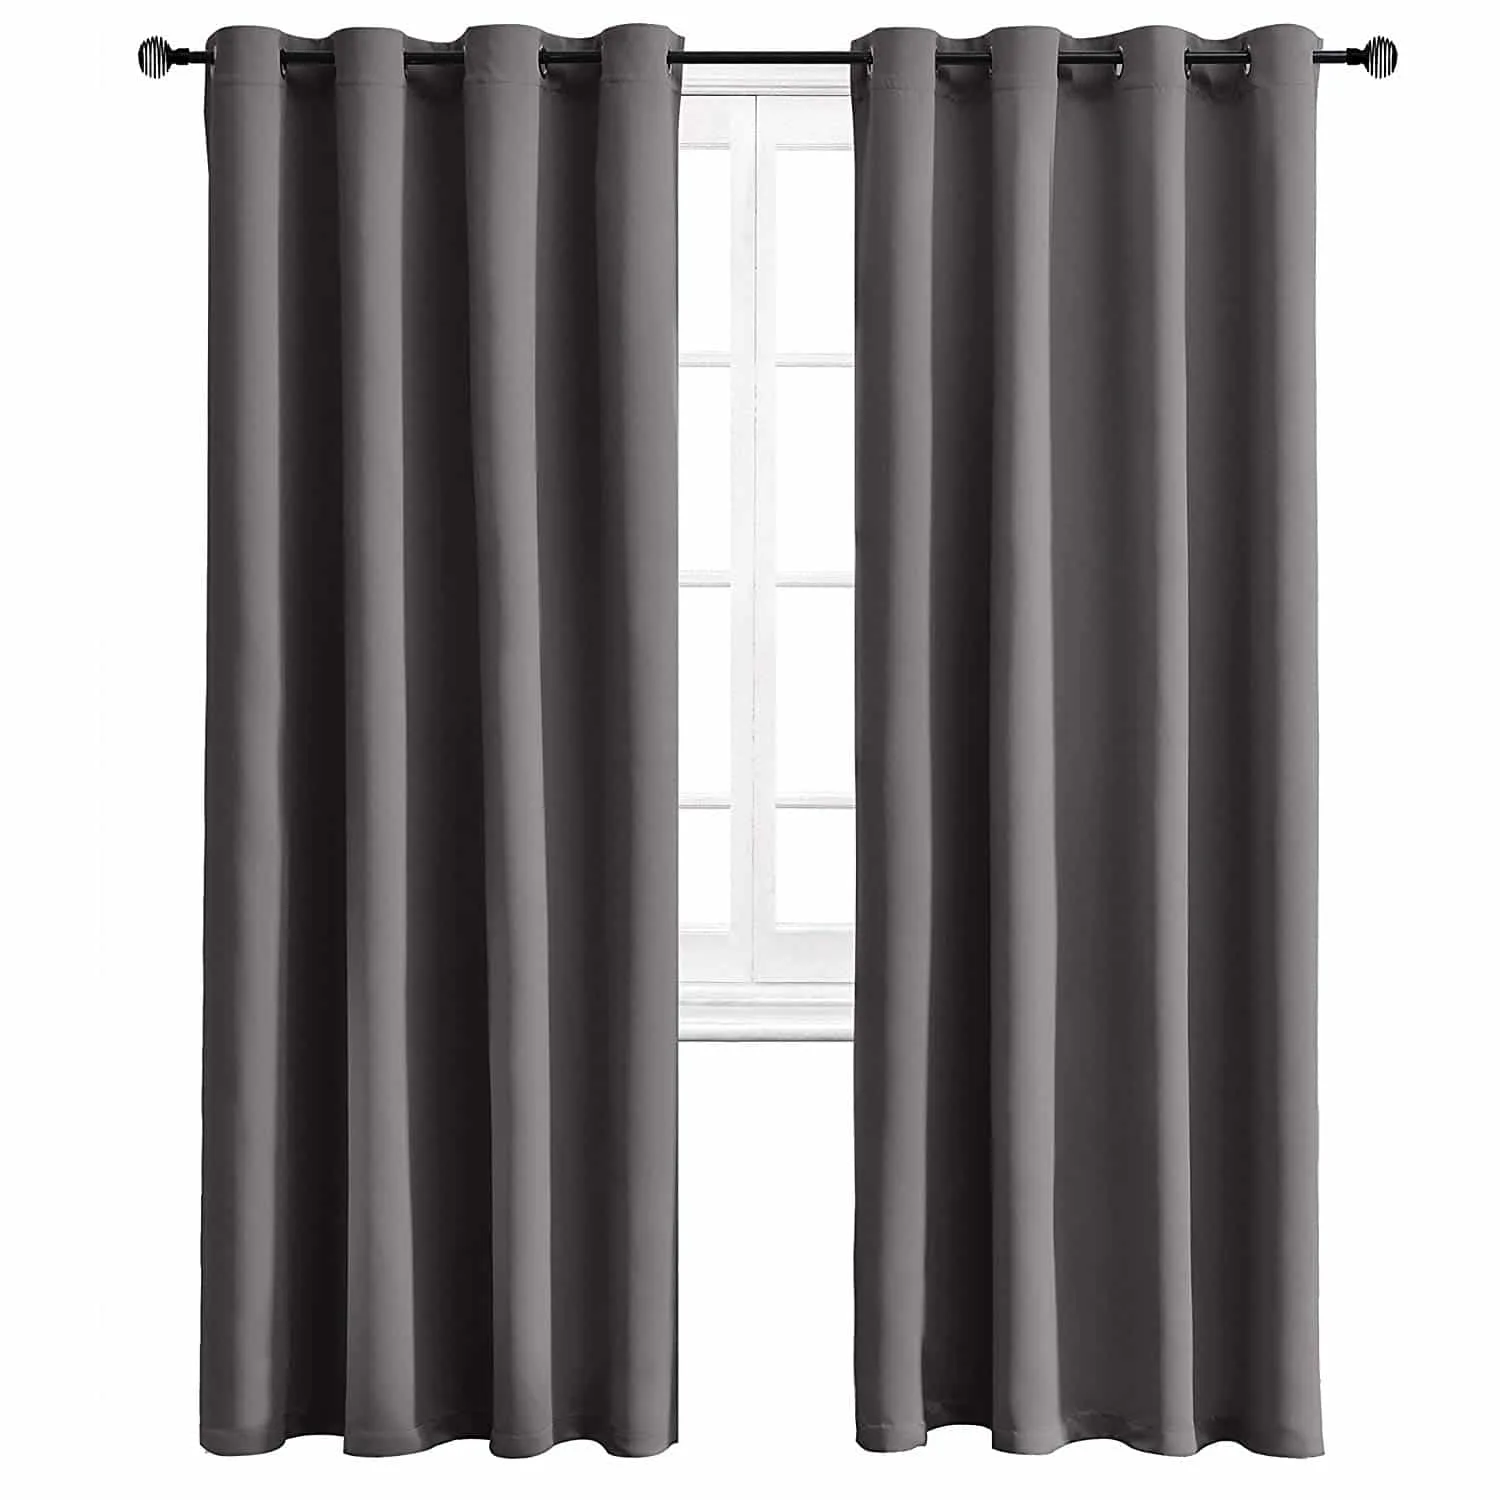 Curtains that keep the cold out by Wontex grey with grommets